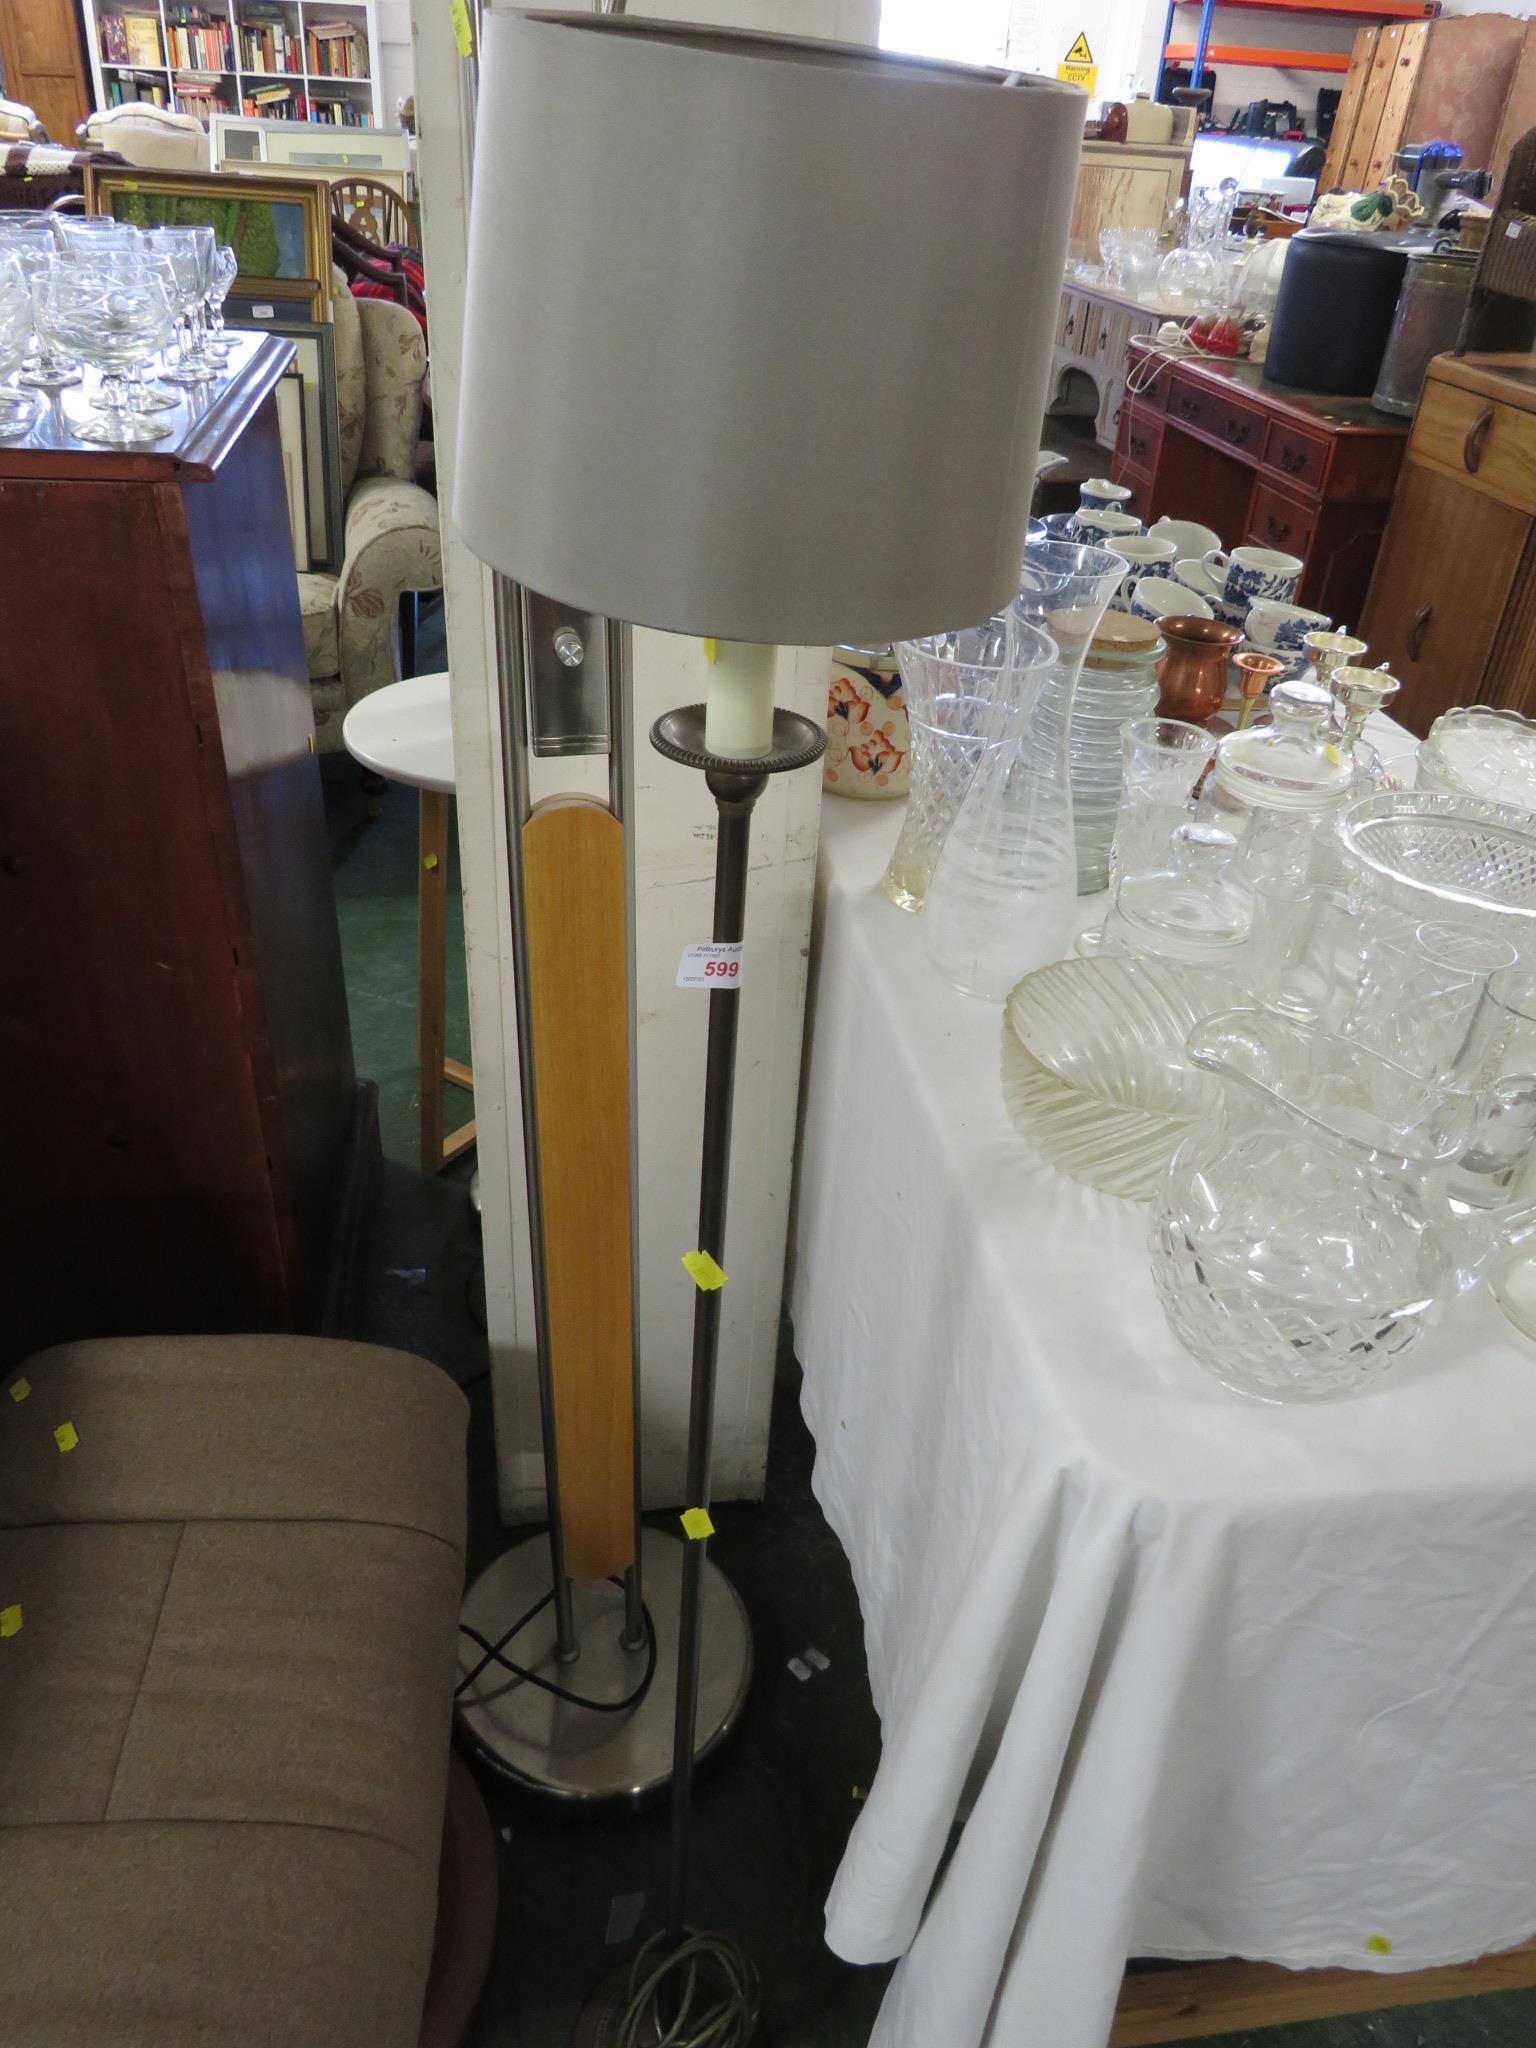 VALSAN BRONZED METAL FLOOR STANDING LAMP WITH CANDLE STYLE FITTING AND A BEIGE SHADE.